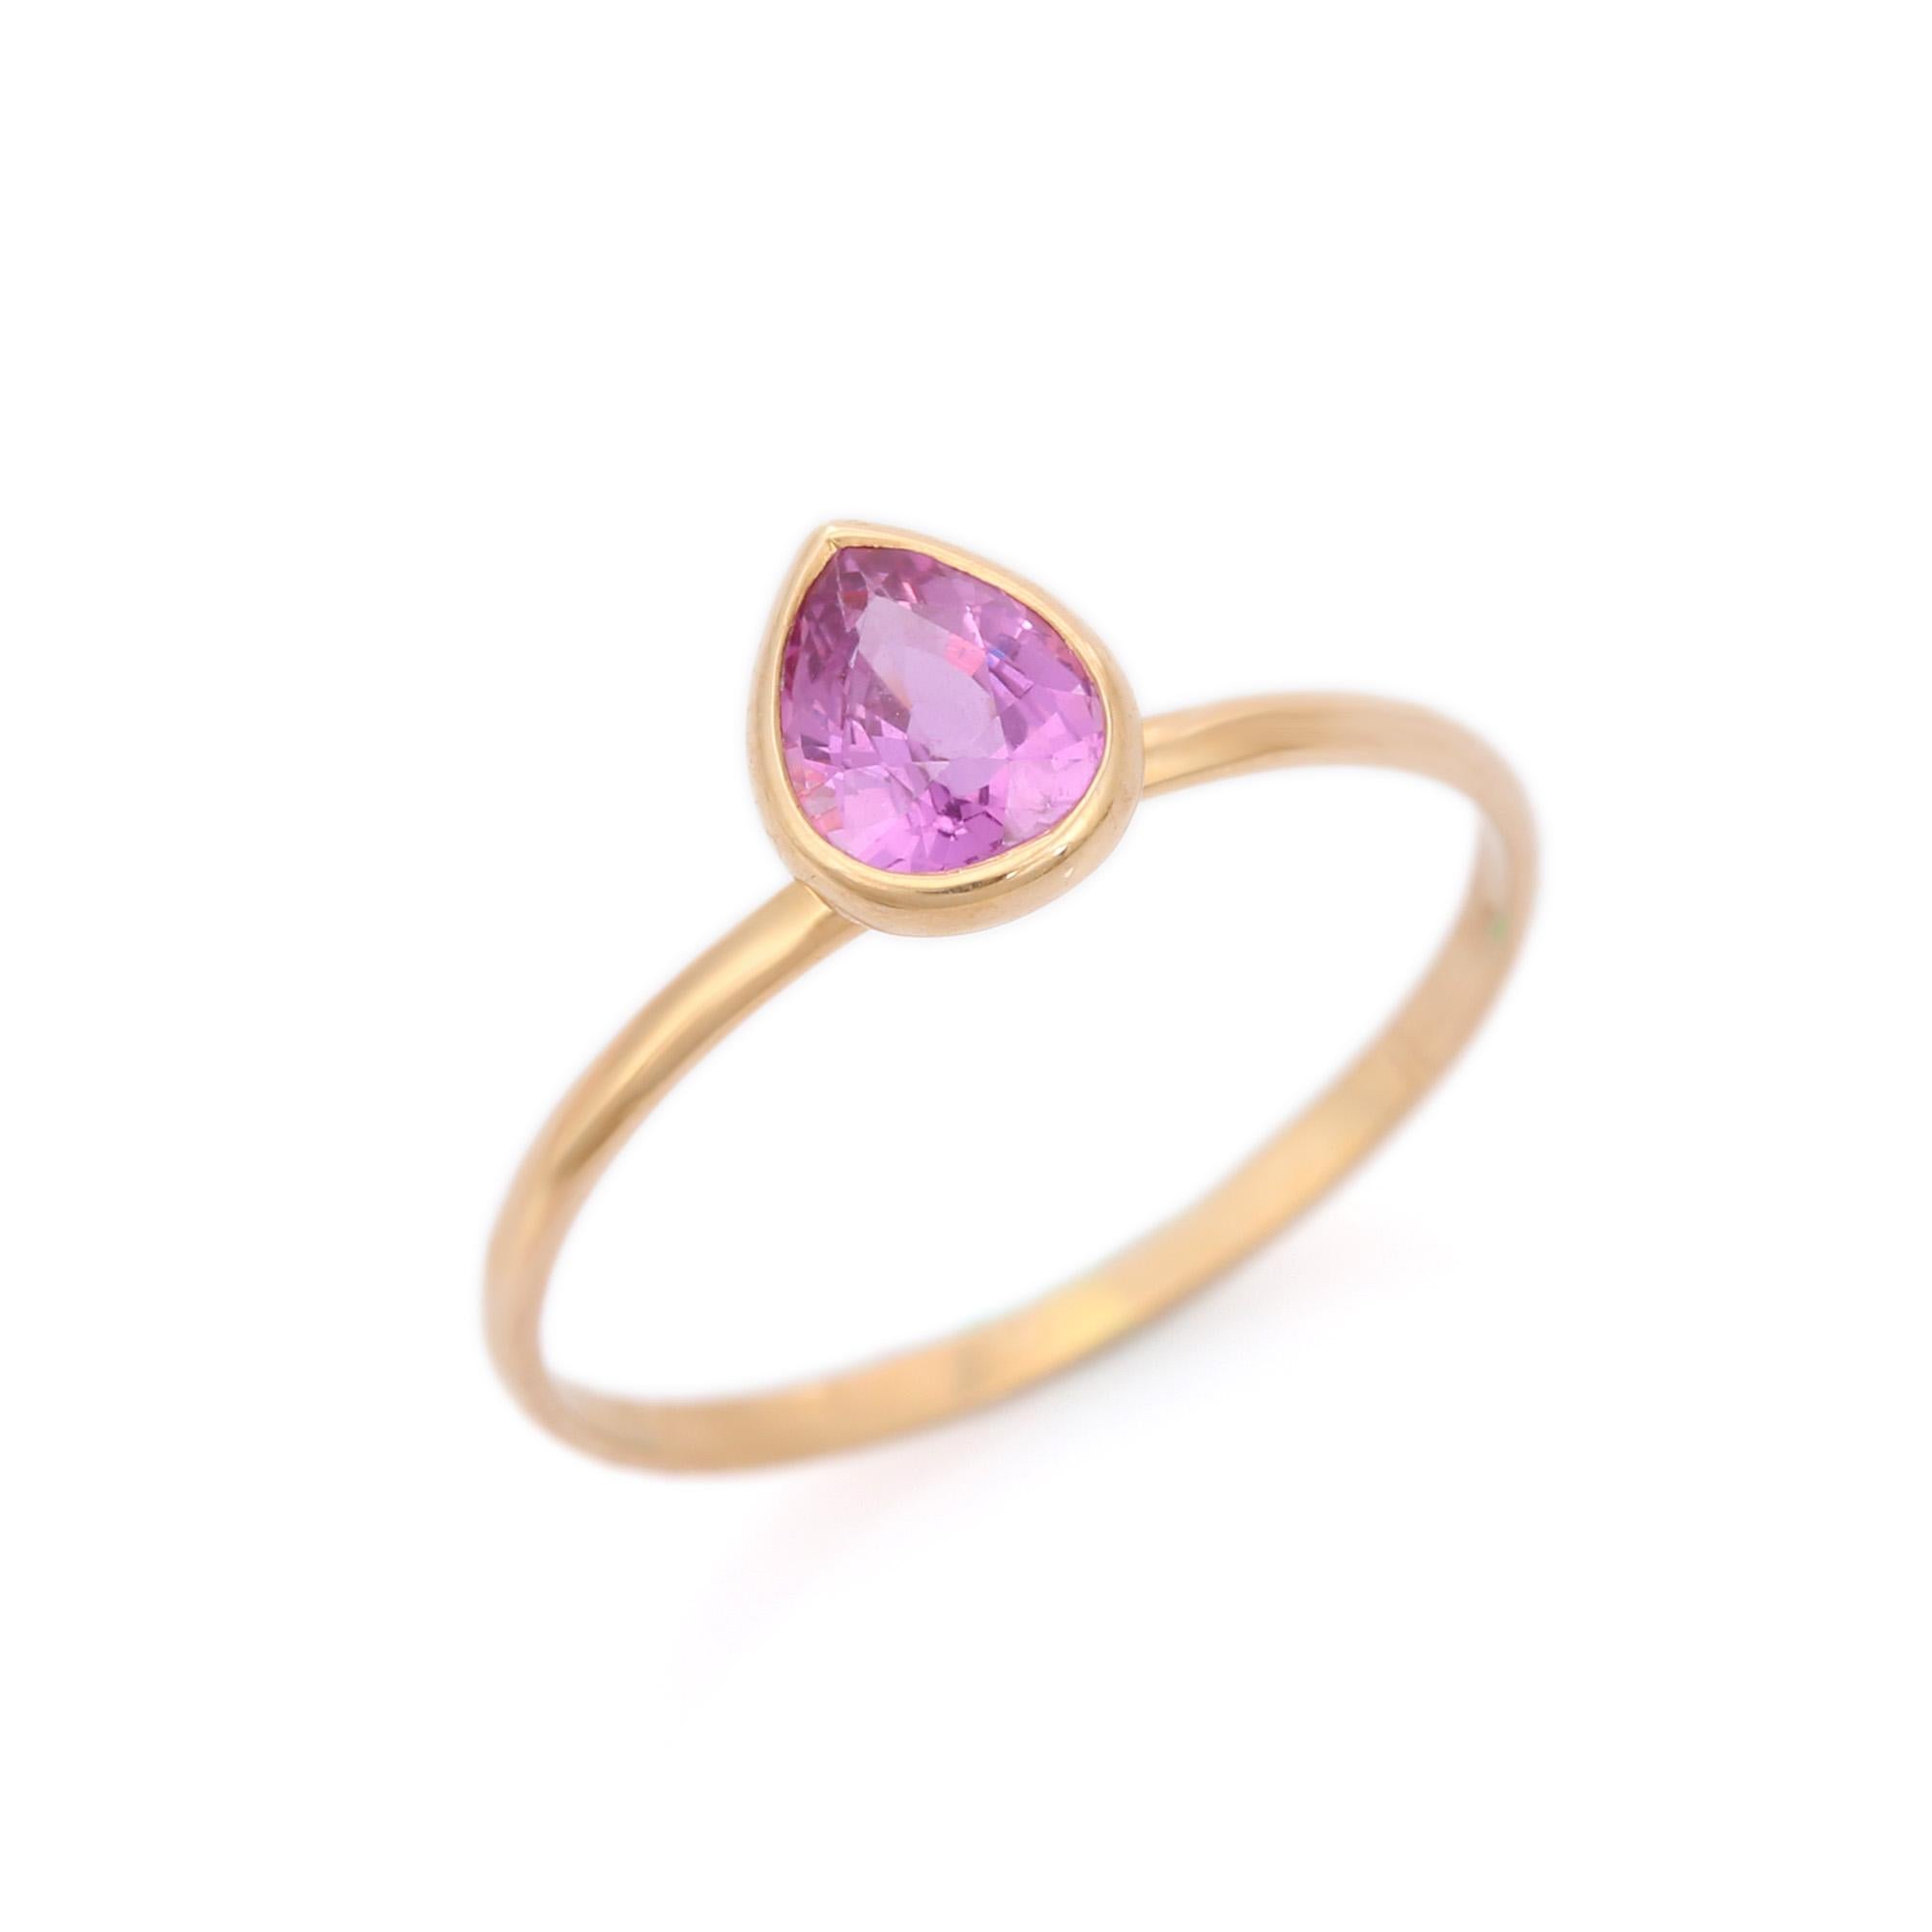 For Sale:  Pink Sapphire Pear Cut Dainty Solitaire Ring in 18K Yellow Gold 3